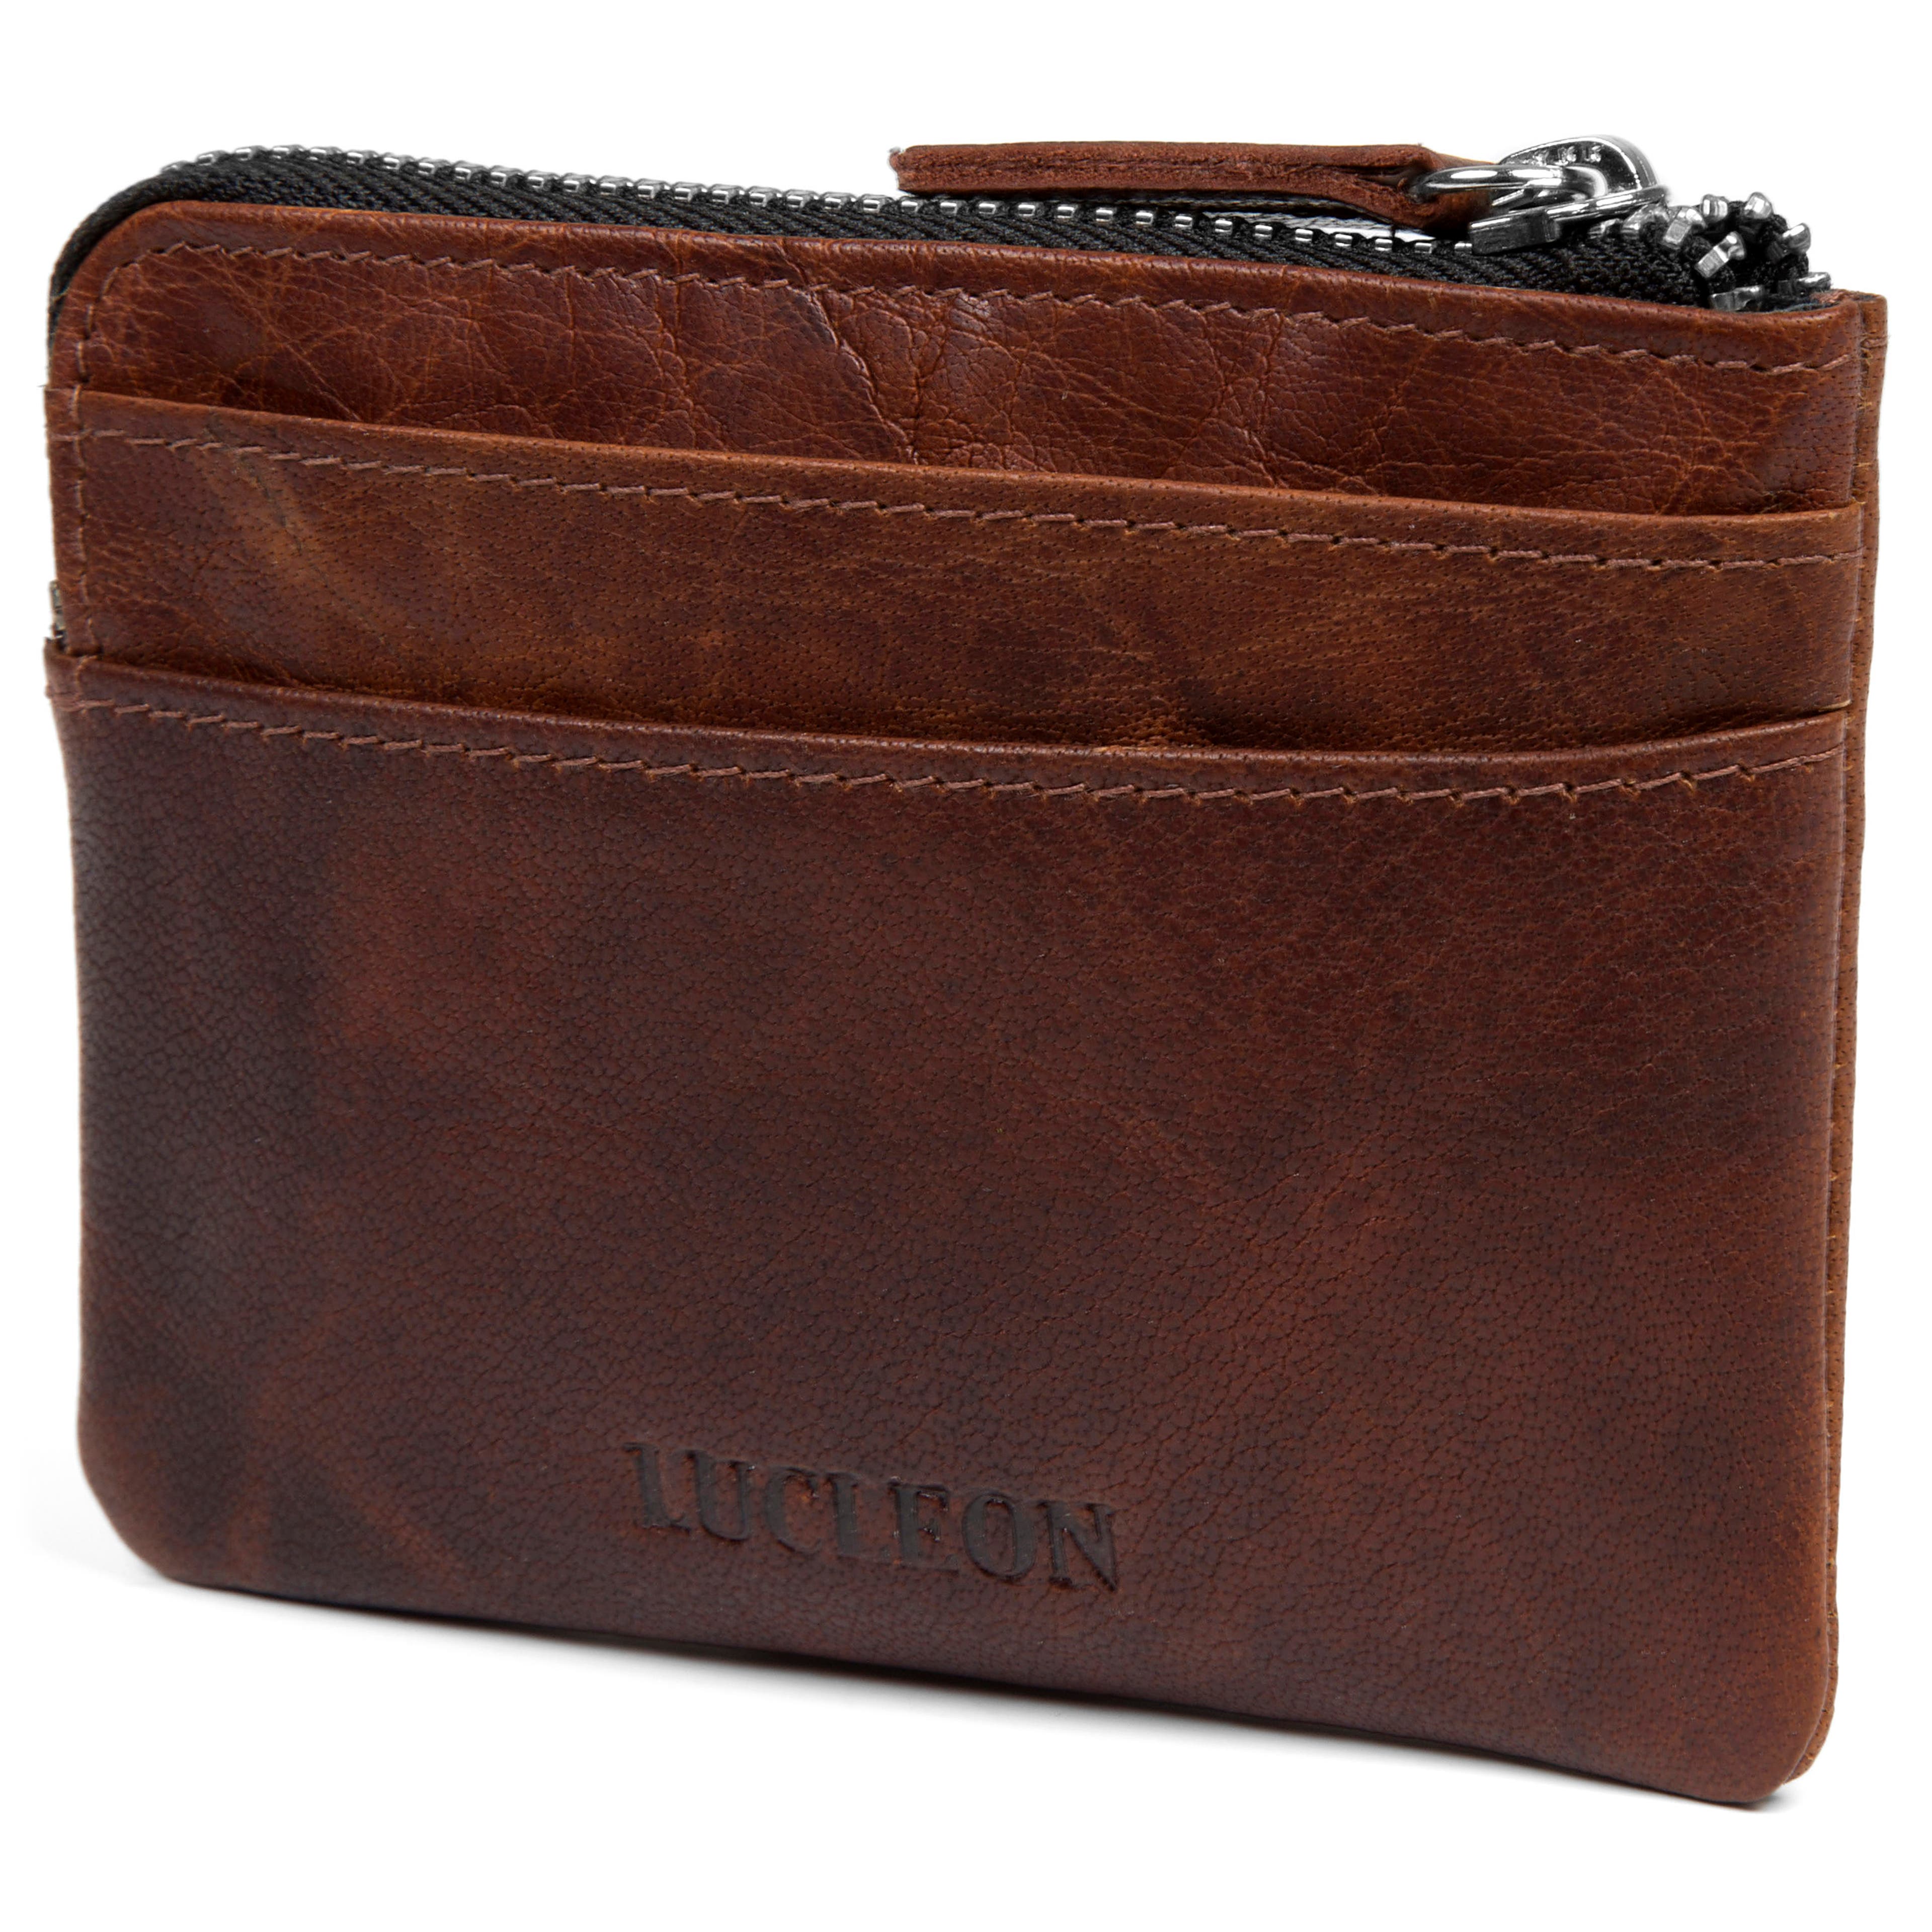 Montreal Zipped Tan RFID Leather Pouch